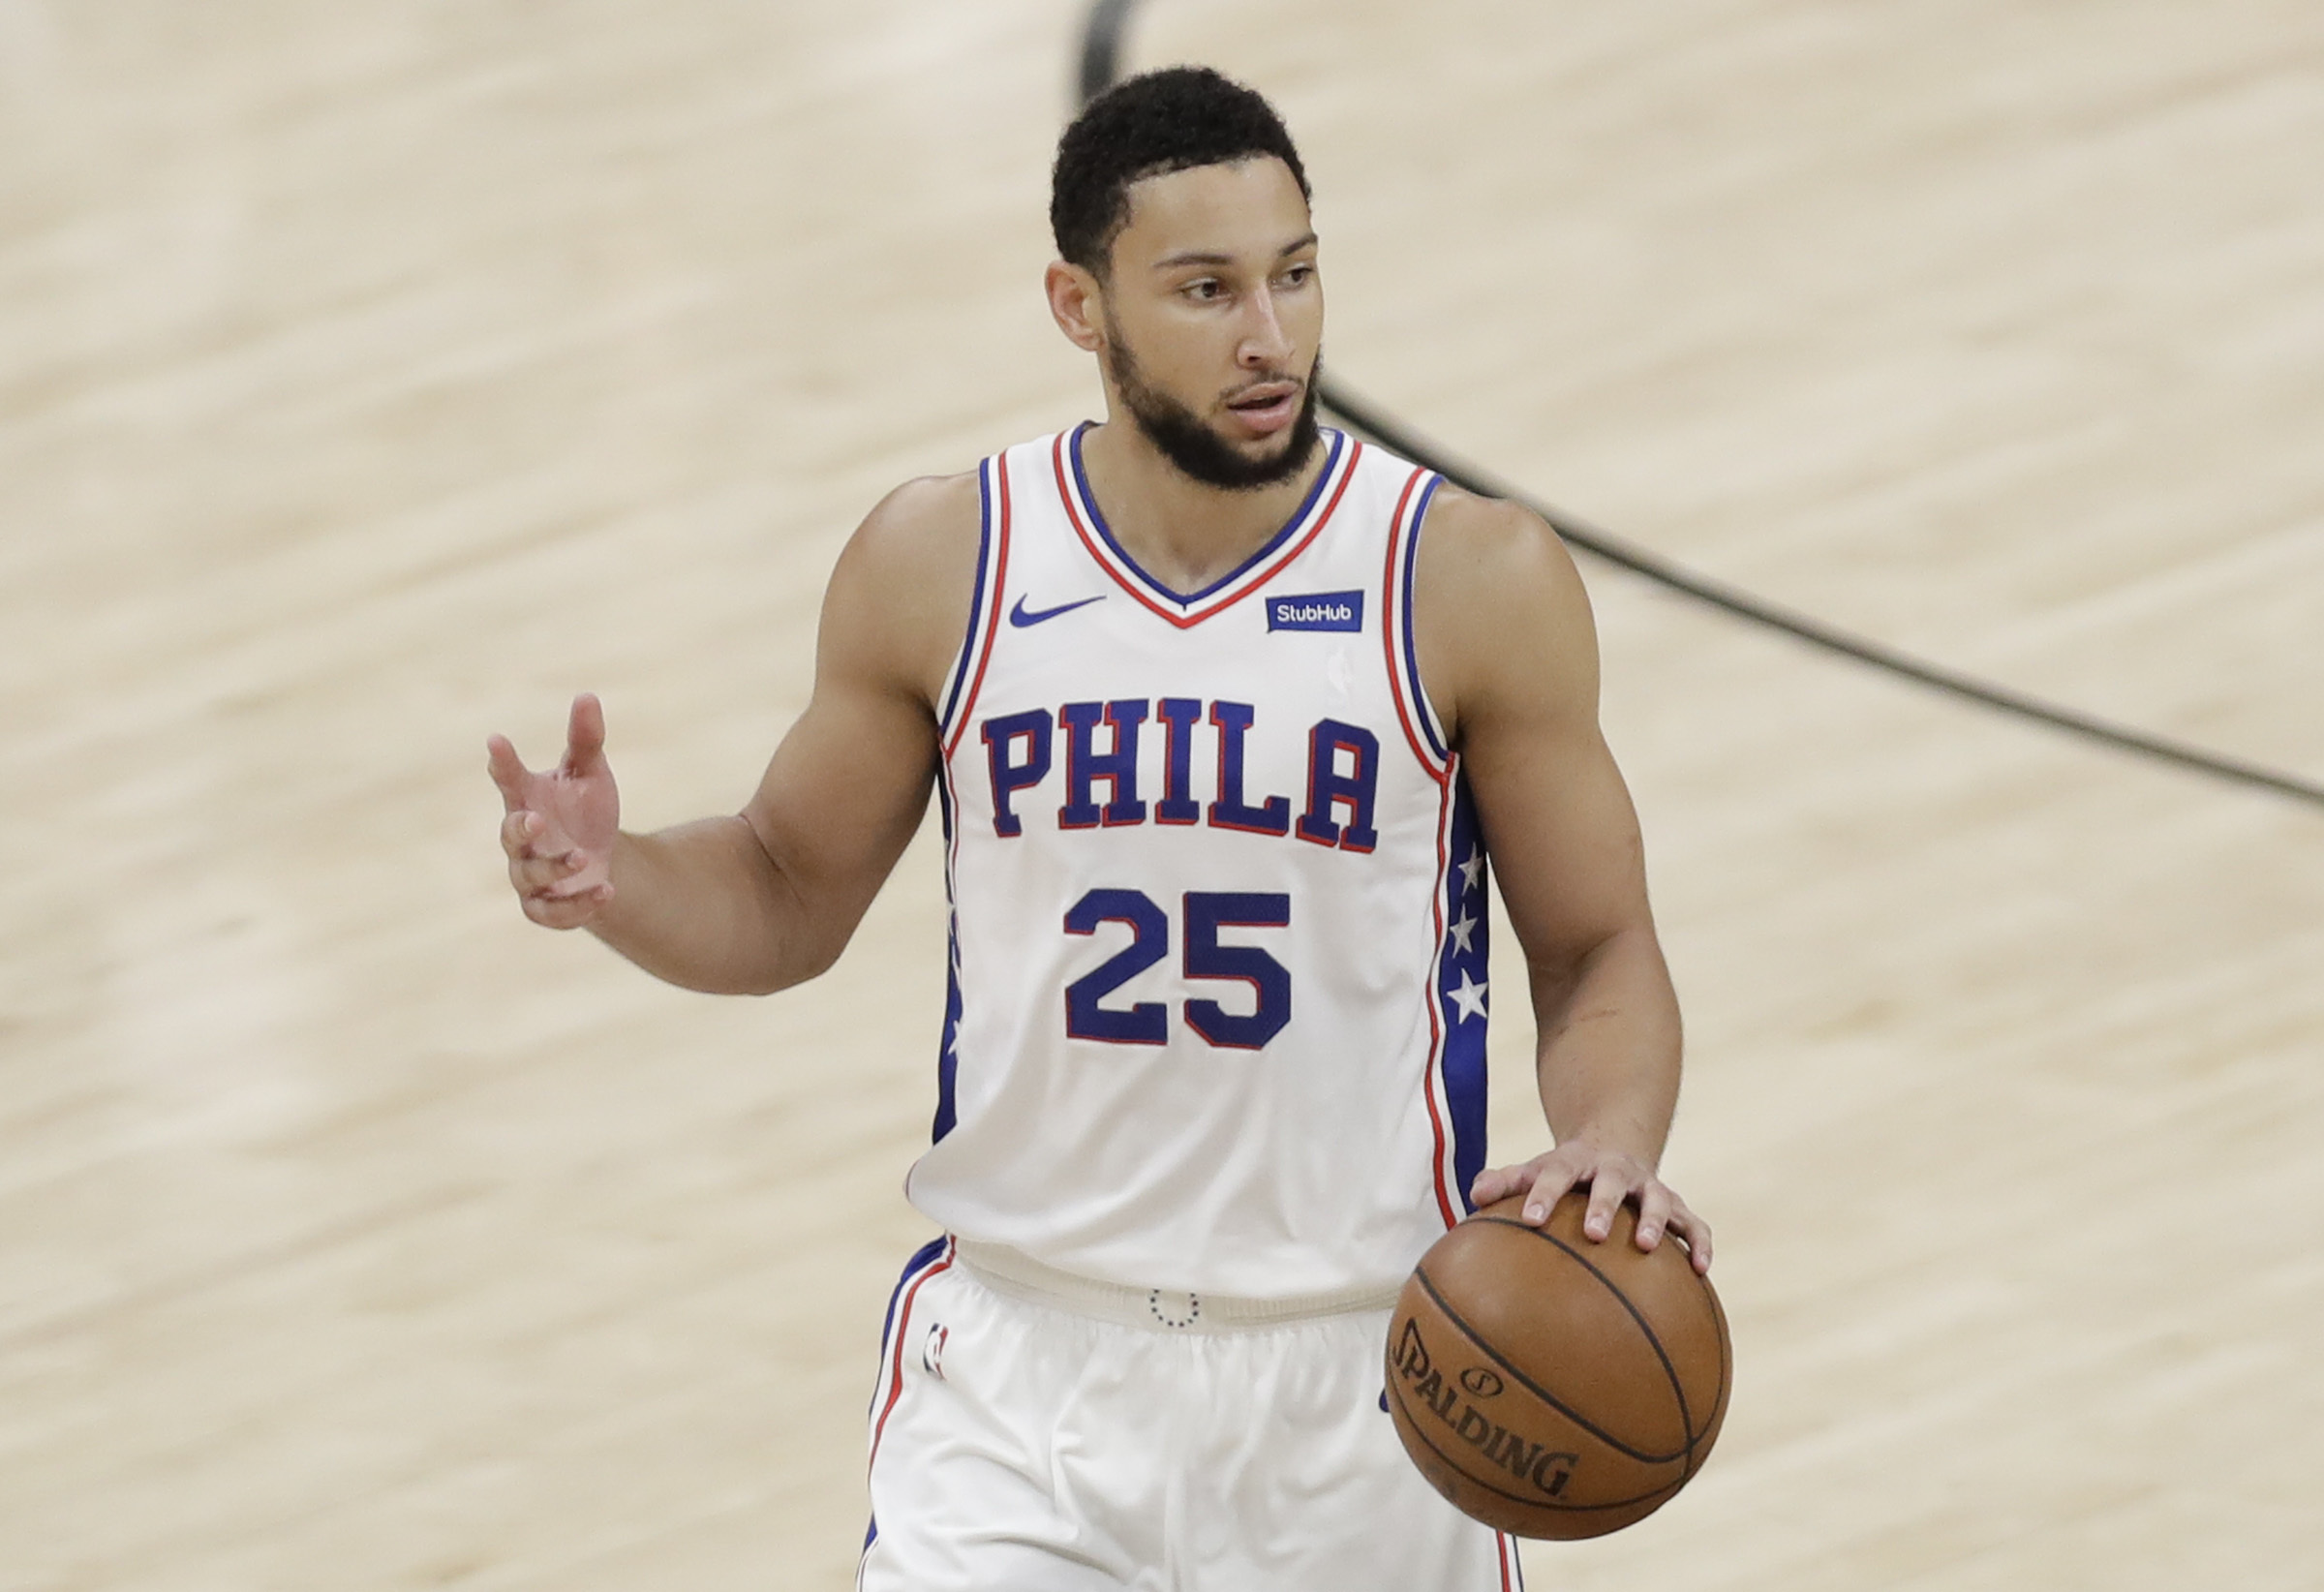 Philly Fans Can't Wait To Show Ben Simmons Some 'Brotherly Love